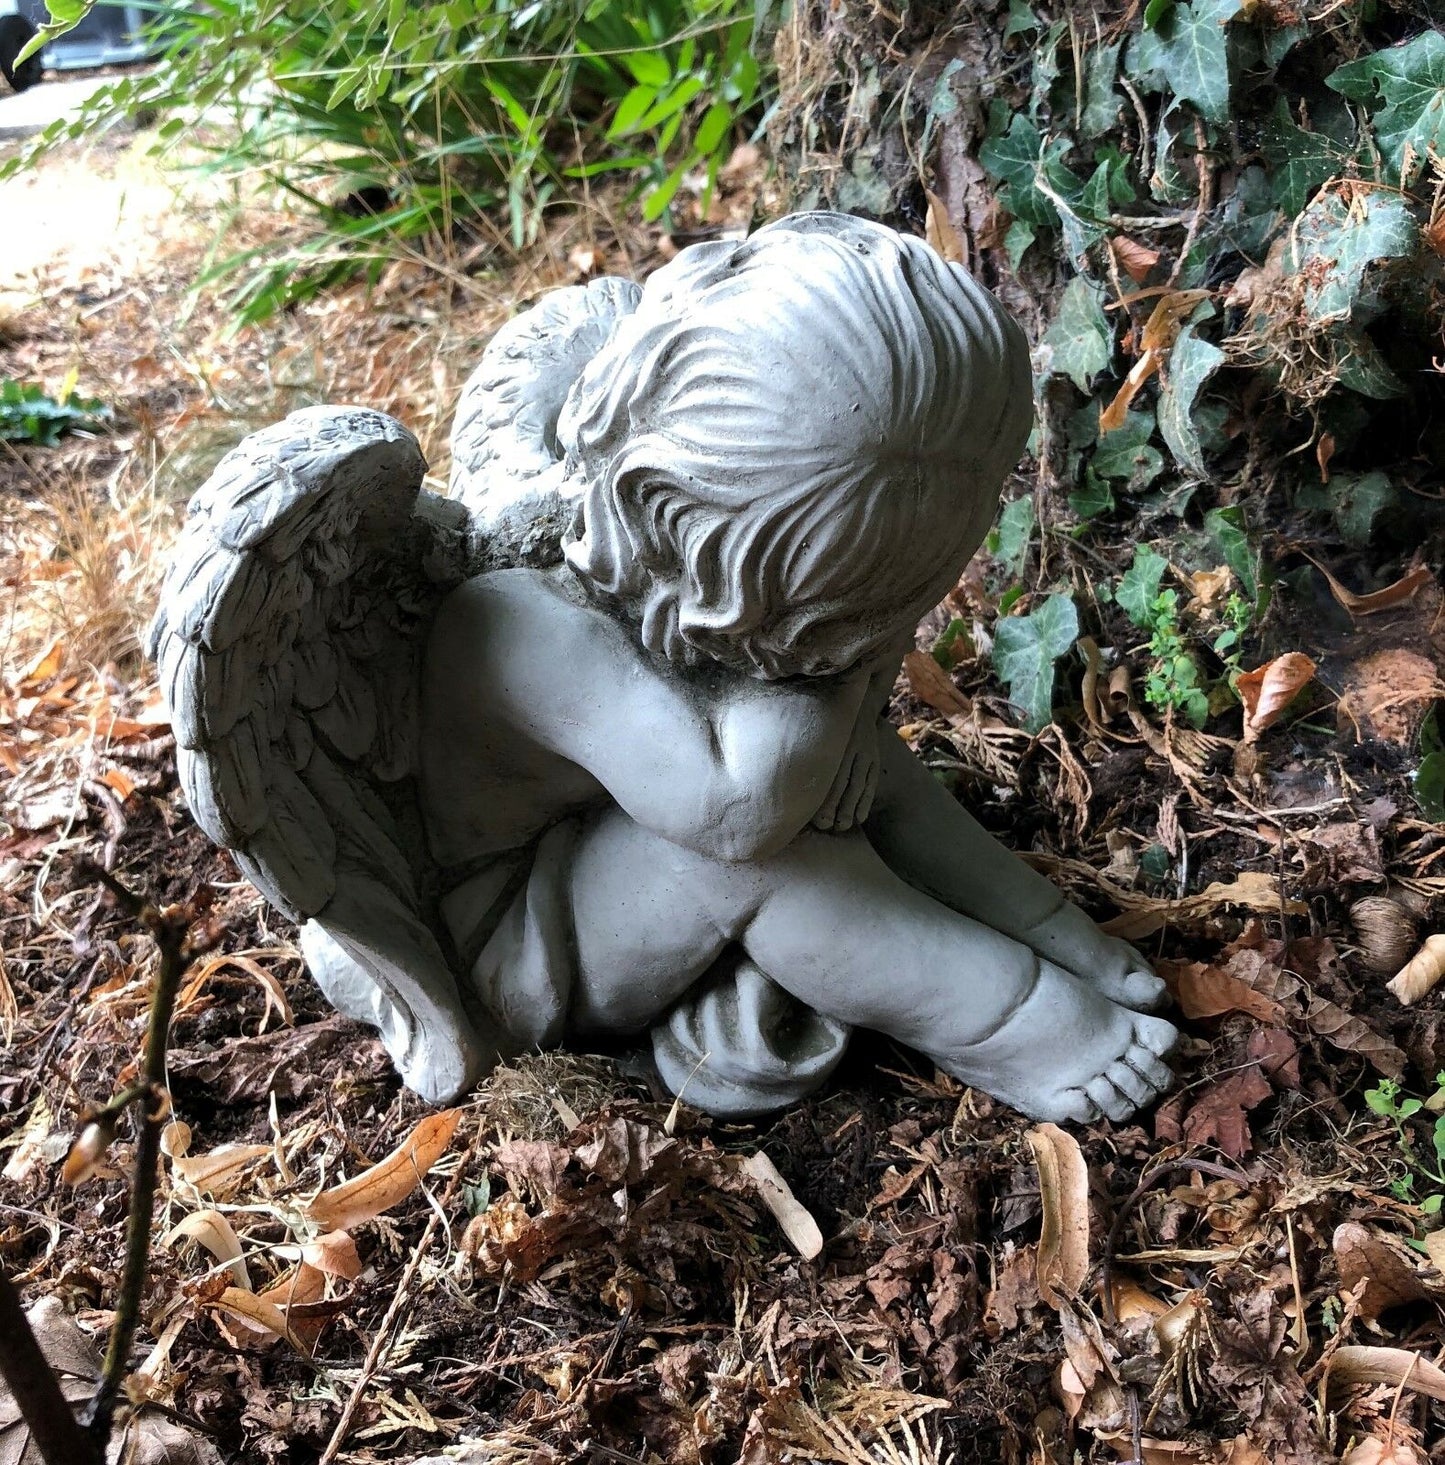 Pair of Stone Baby Angel Ornaments